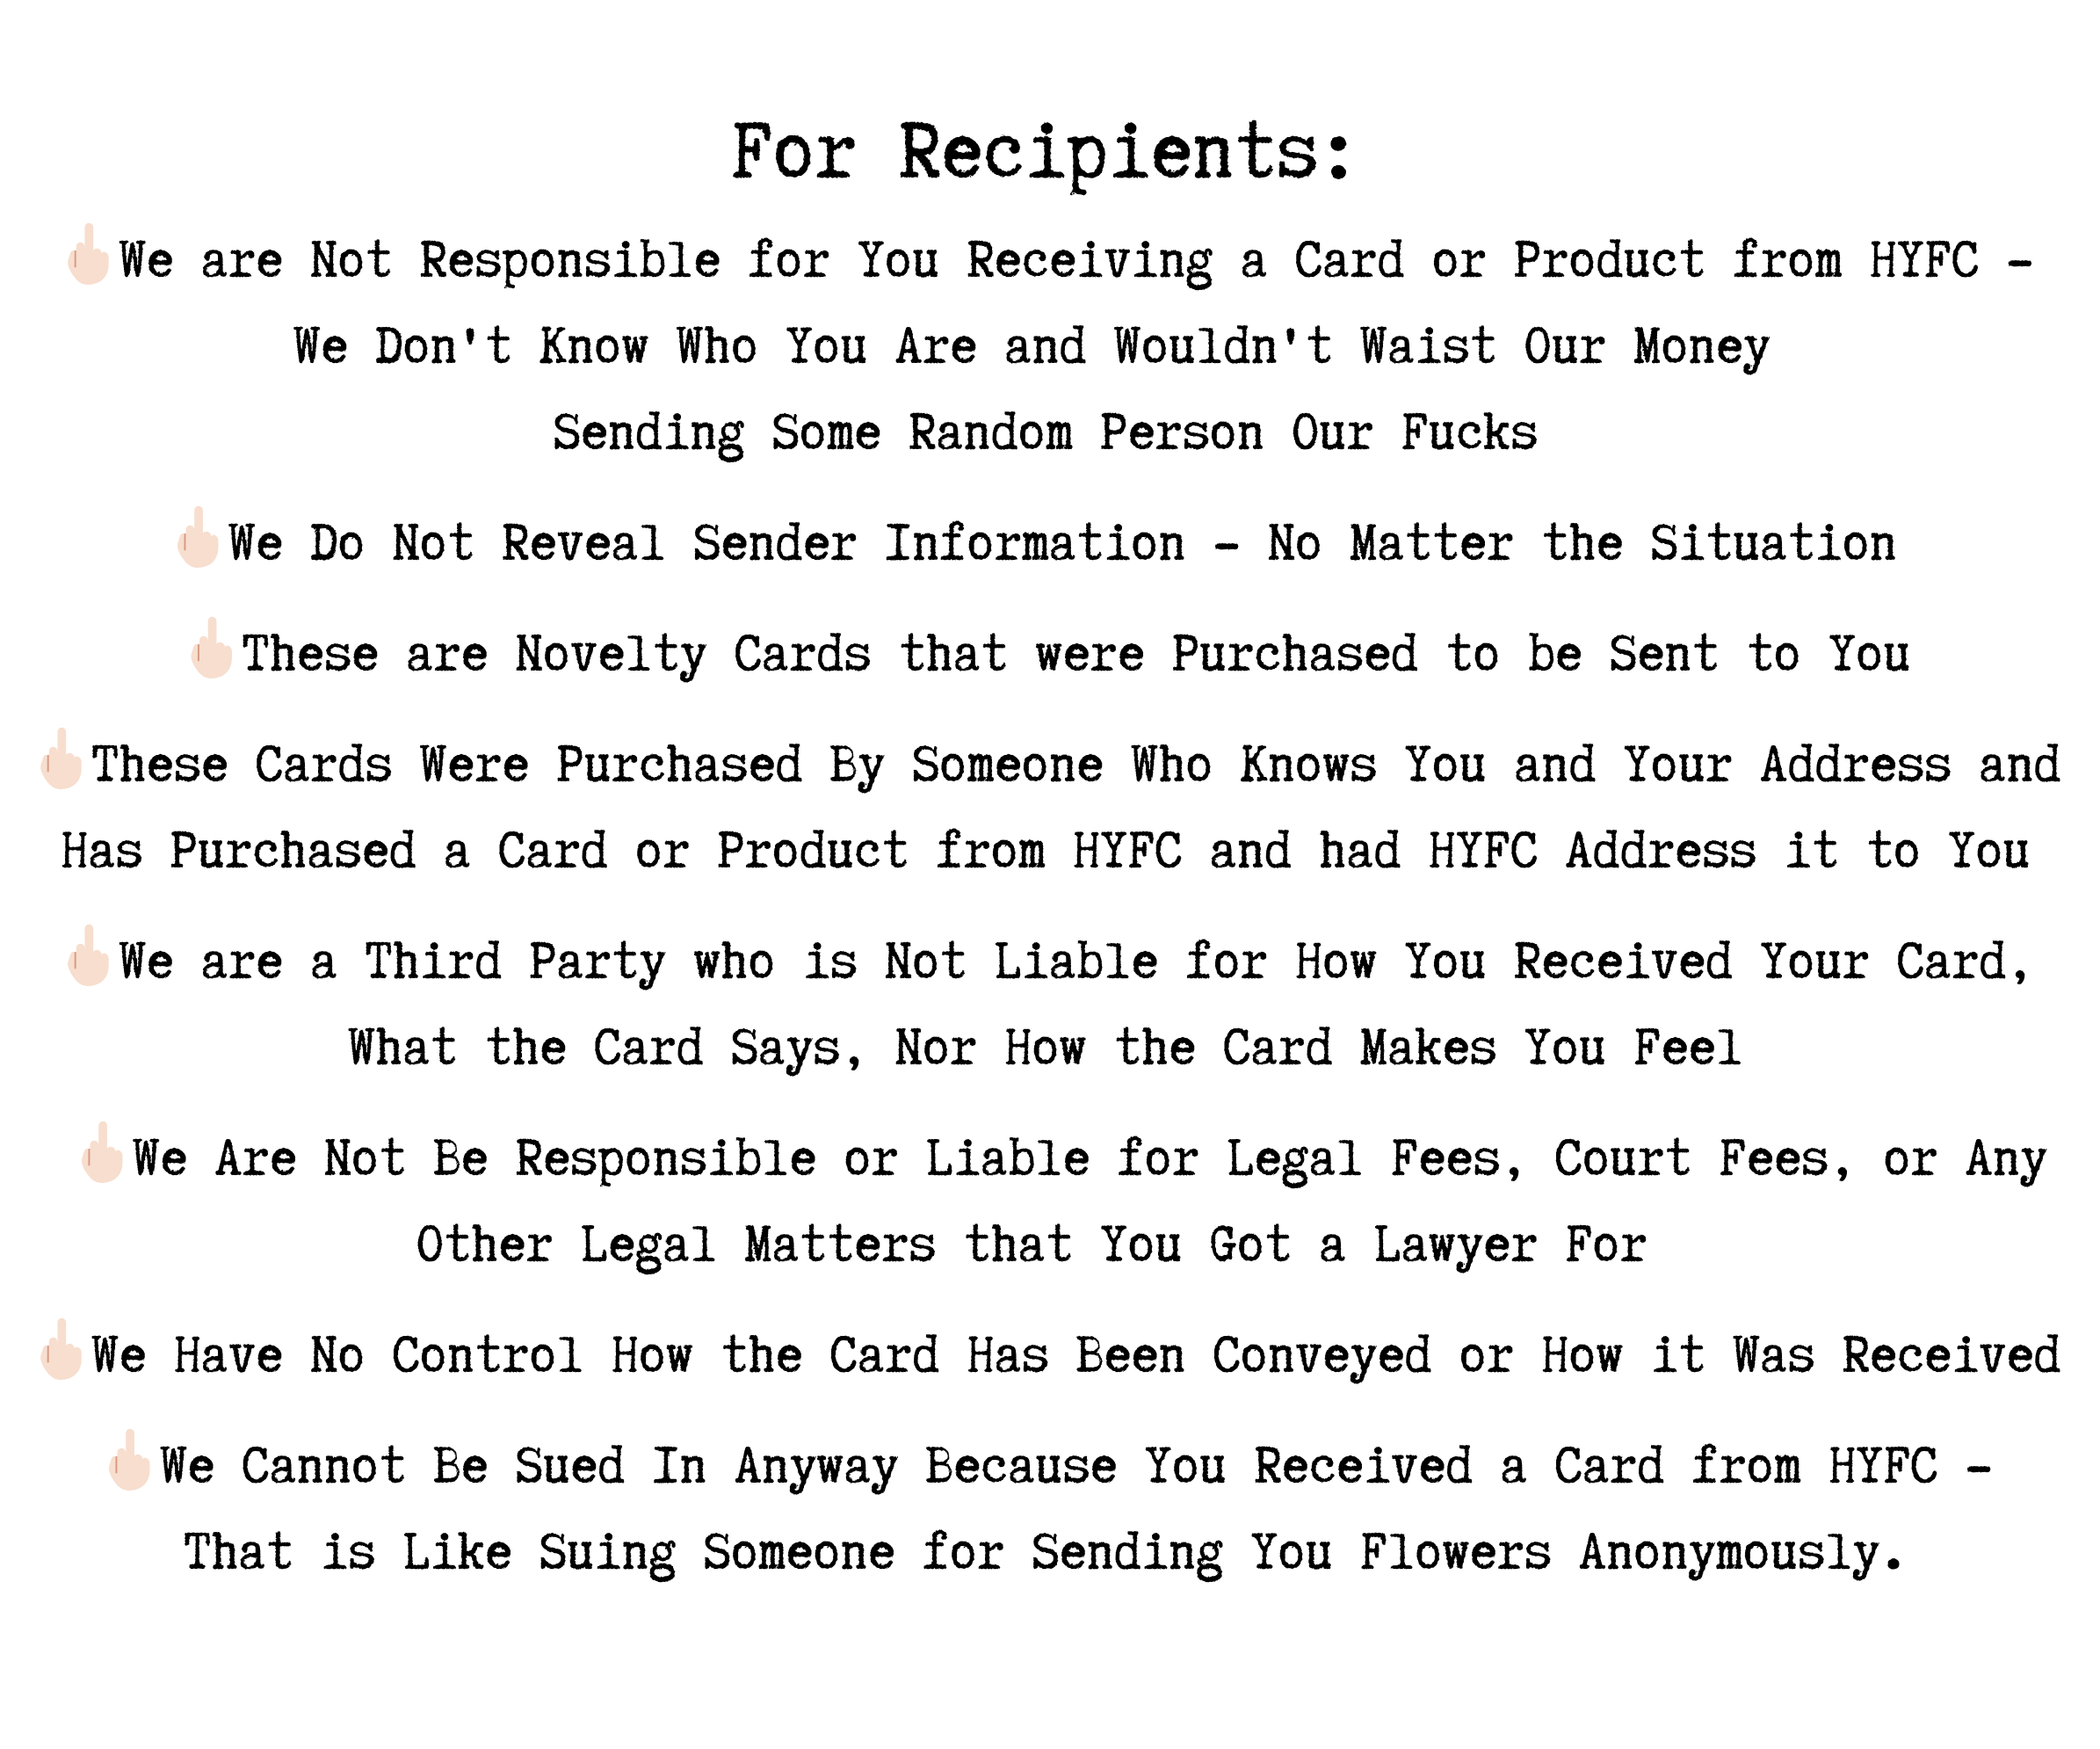 Disclaimer for Recipients says HYFC is not responsible for sent or received cards along with other release information